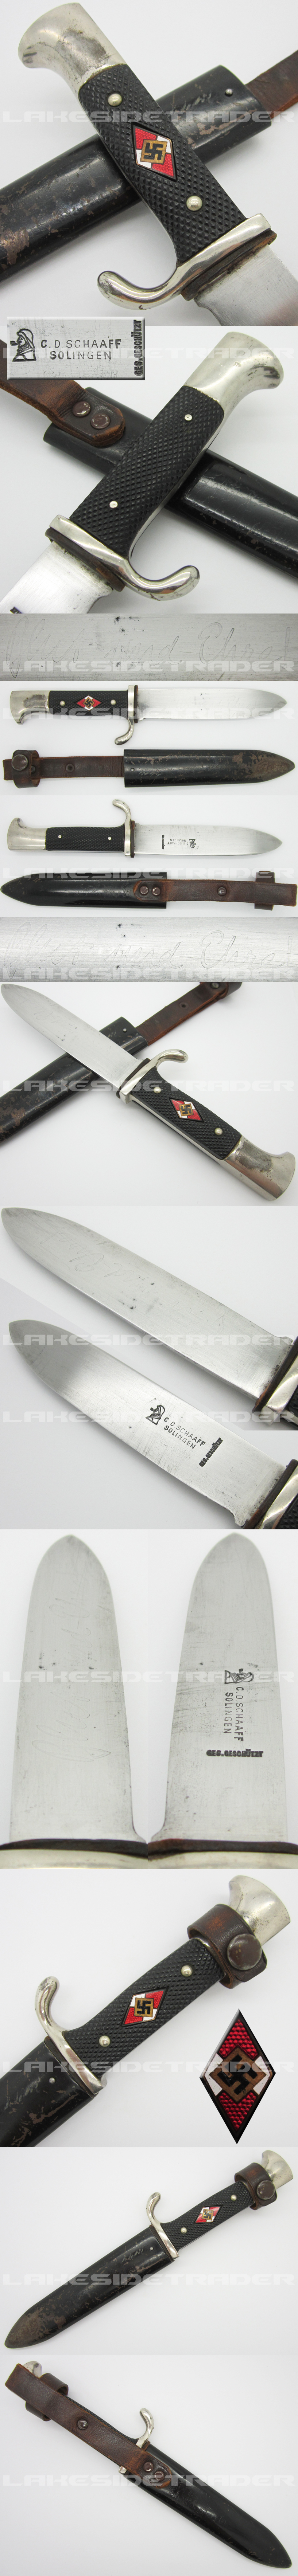 Early Hitler Youth Knife by C.D. Schaaff